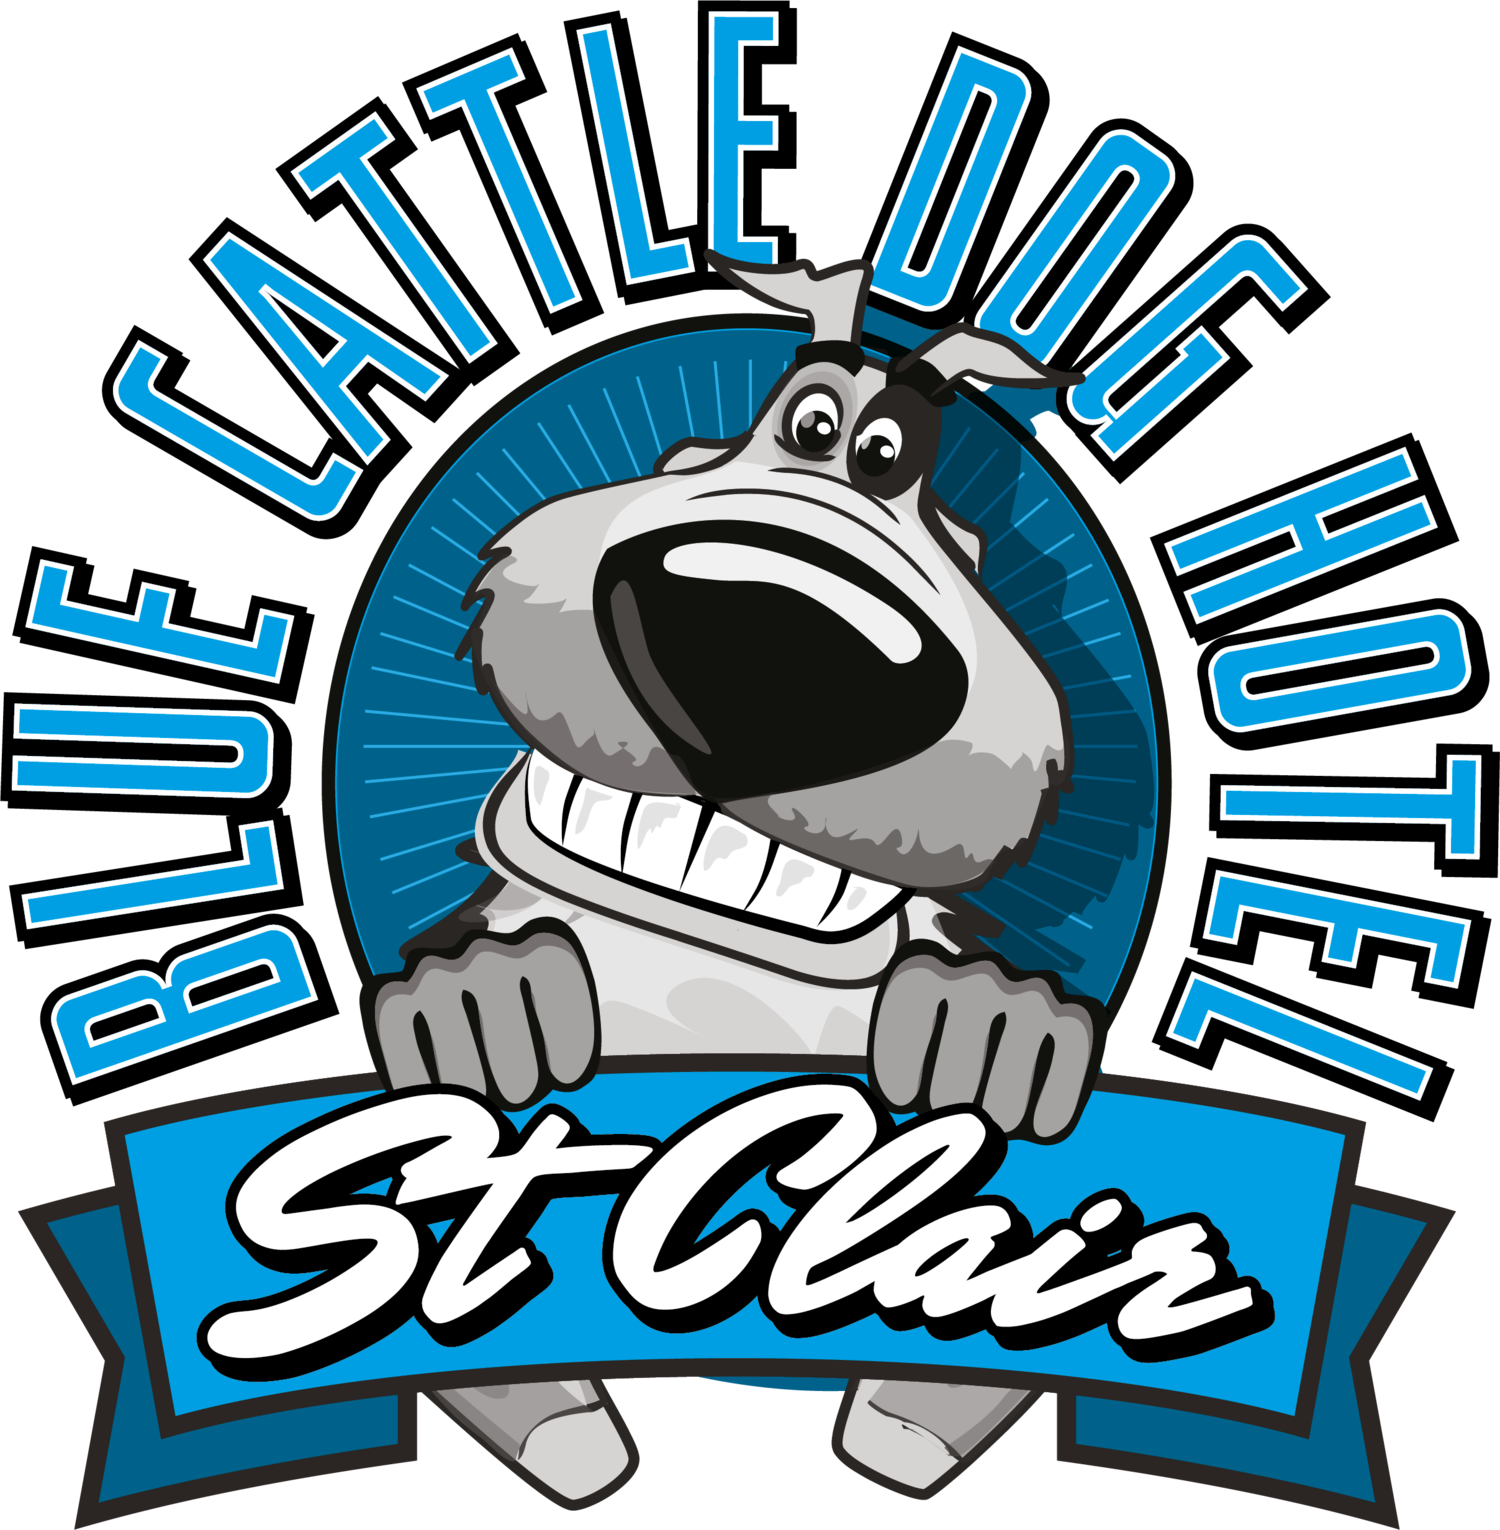 Blue Cattle Dog Hotel, St Clair, NSW